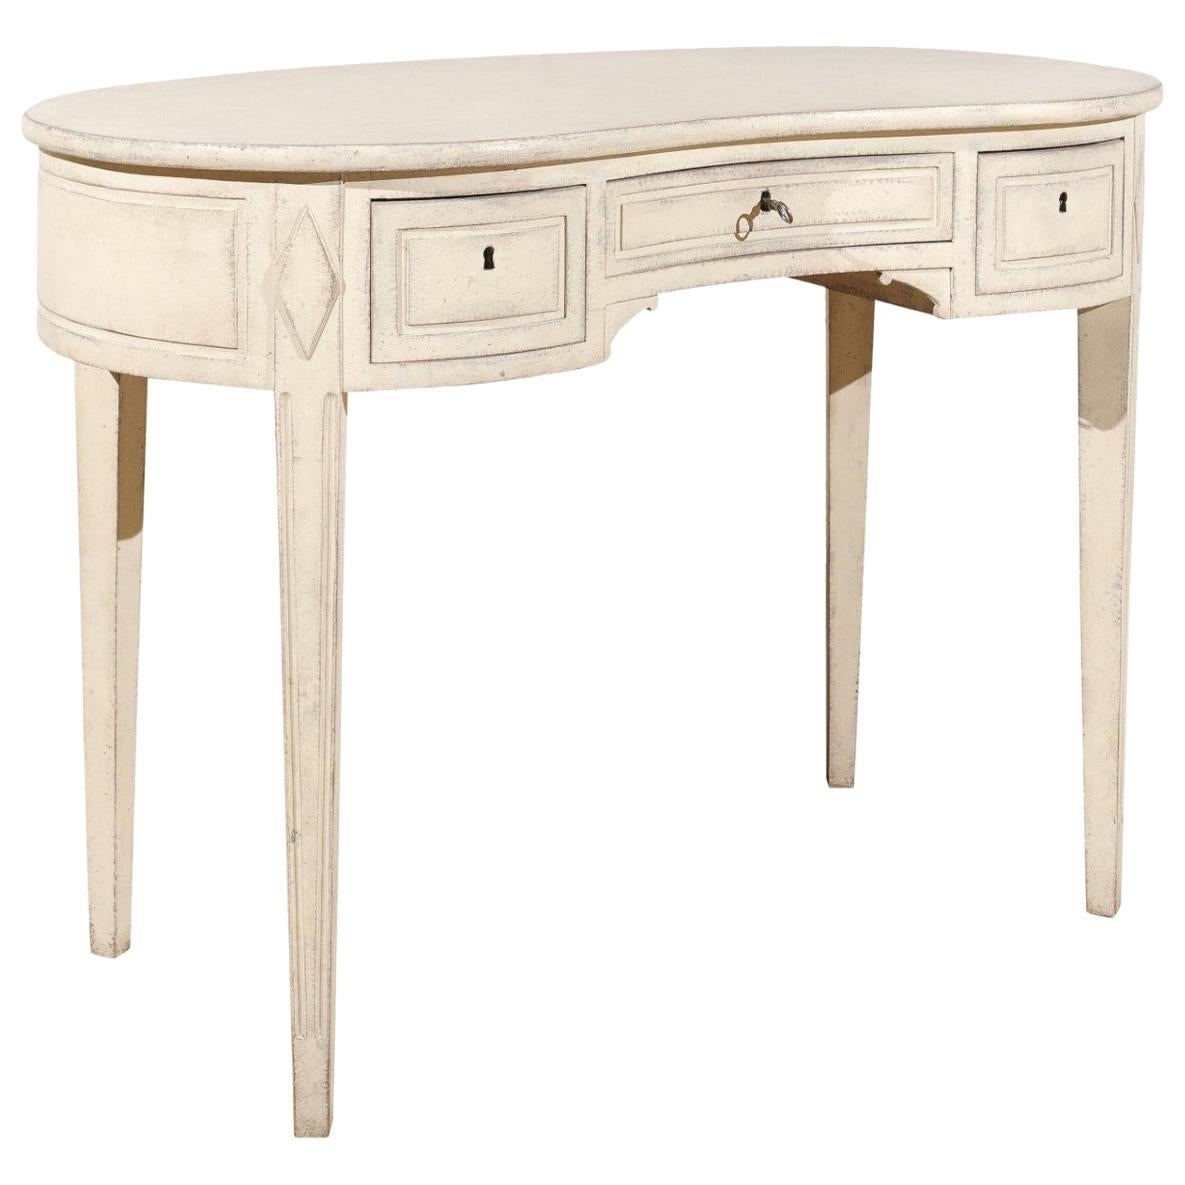 Swedish Gustavian Style 19th Century Painted Wood Freestanding Dressing Table